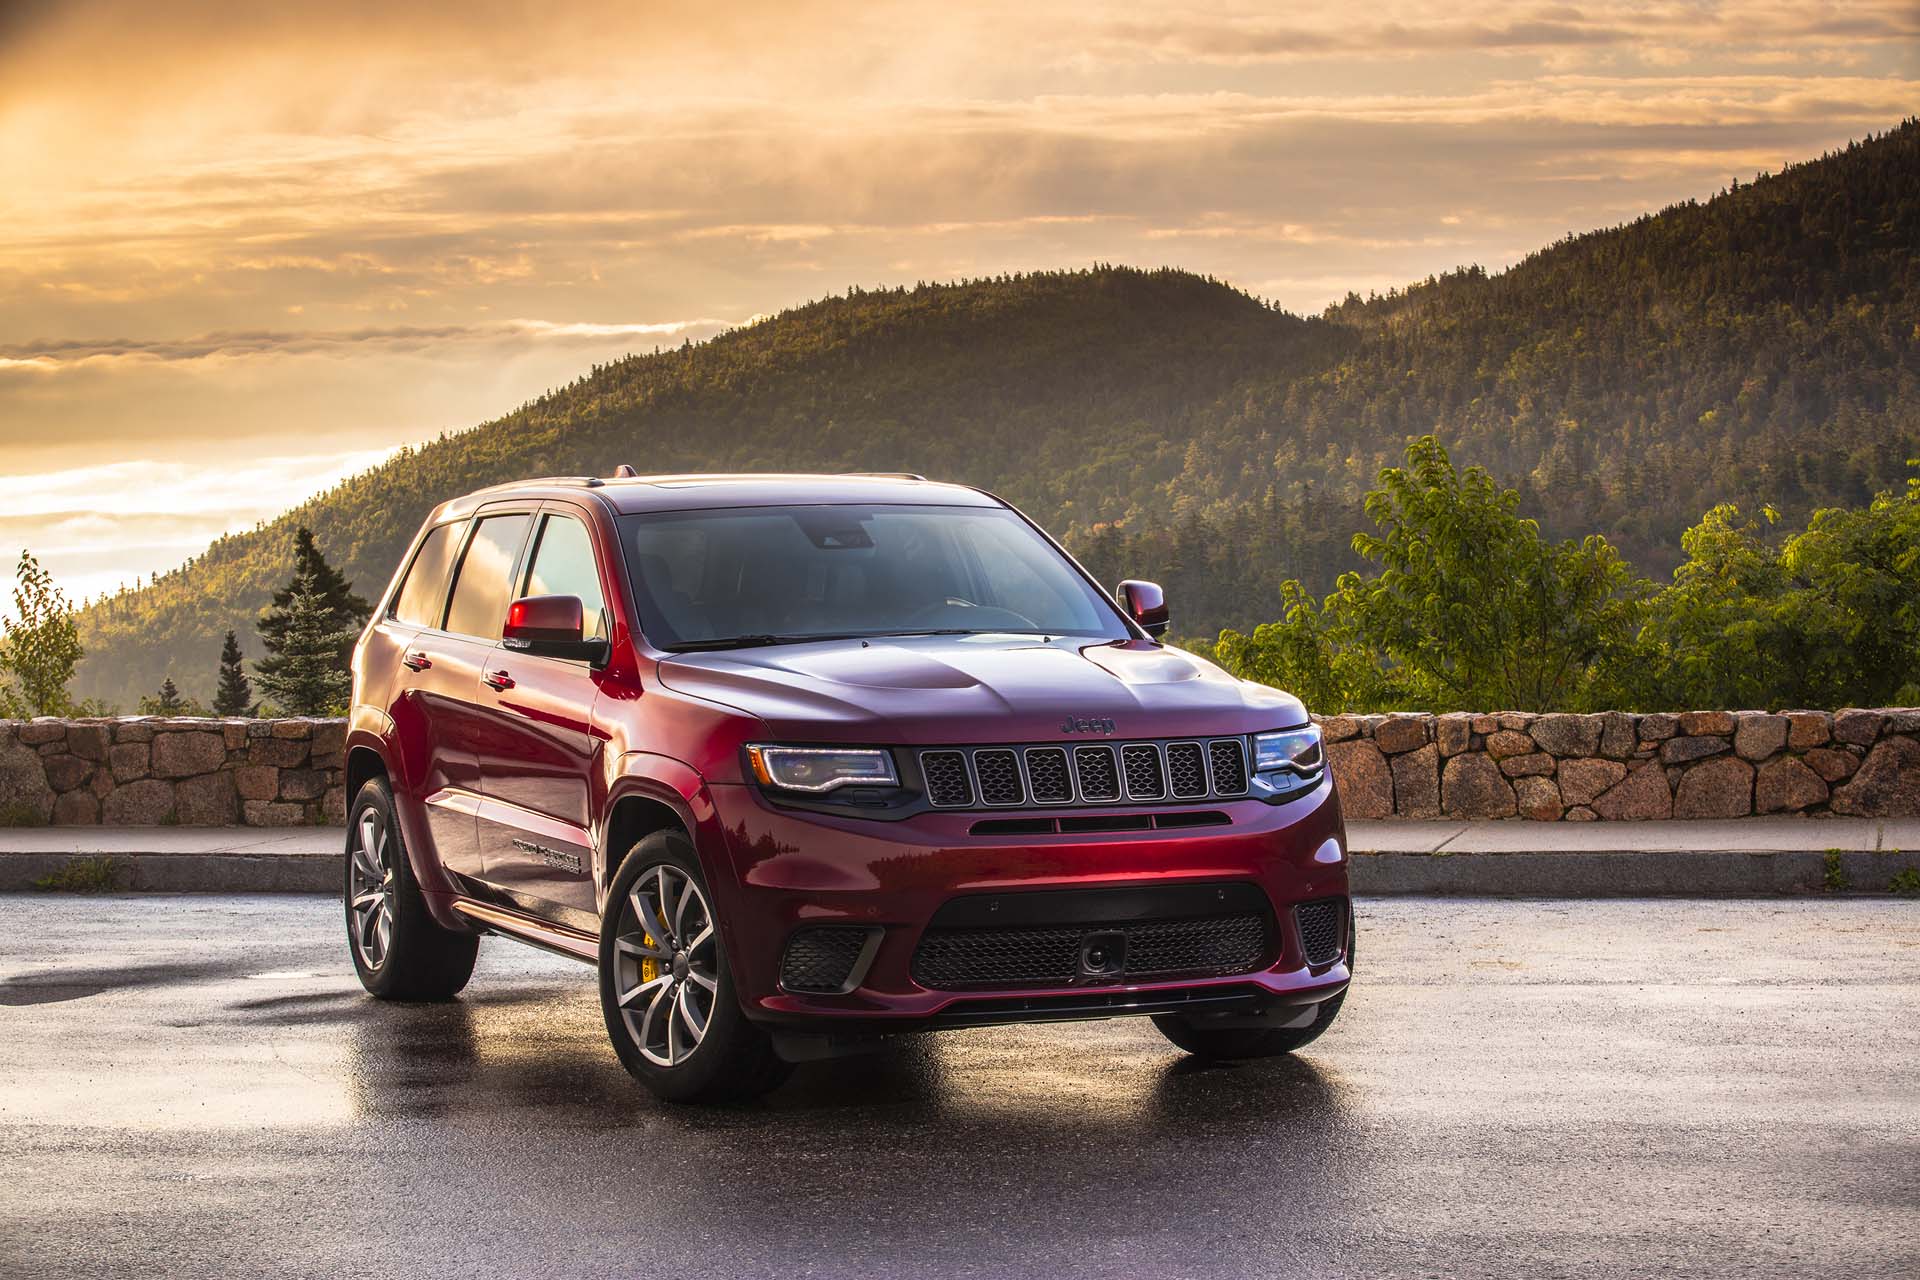 FCA announces $4.5B investment for next-gen Jeep Grand Cherokee